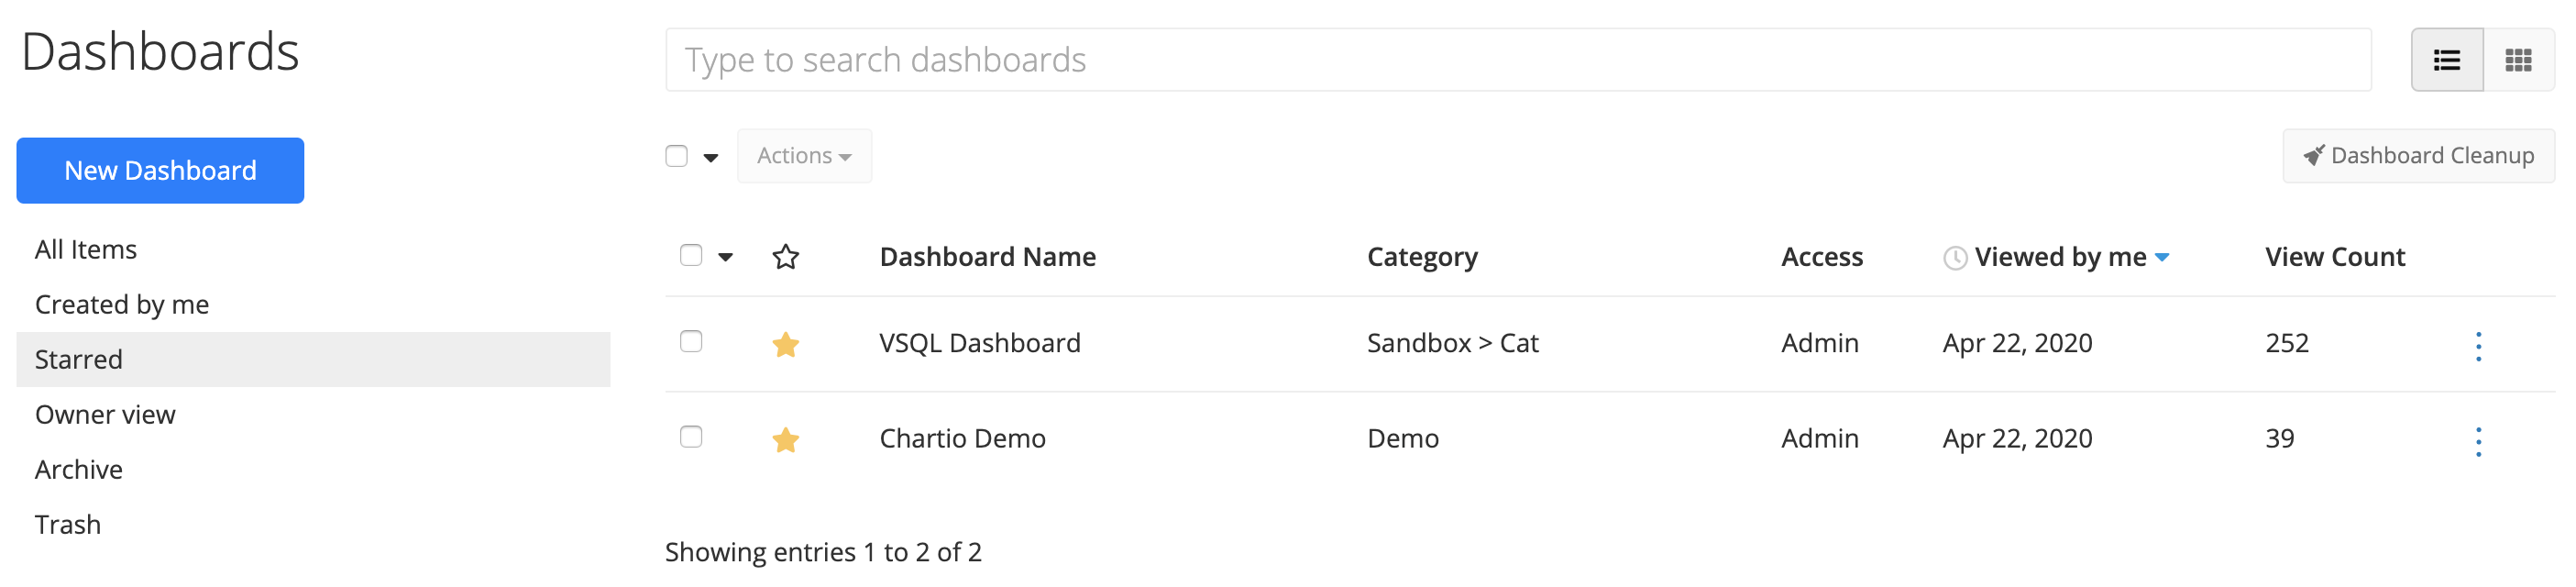 View all your favorite dashboards from the Starred list in the landing page